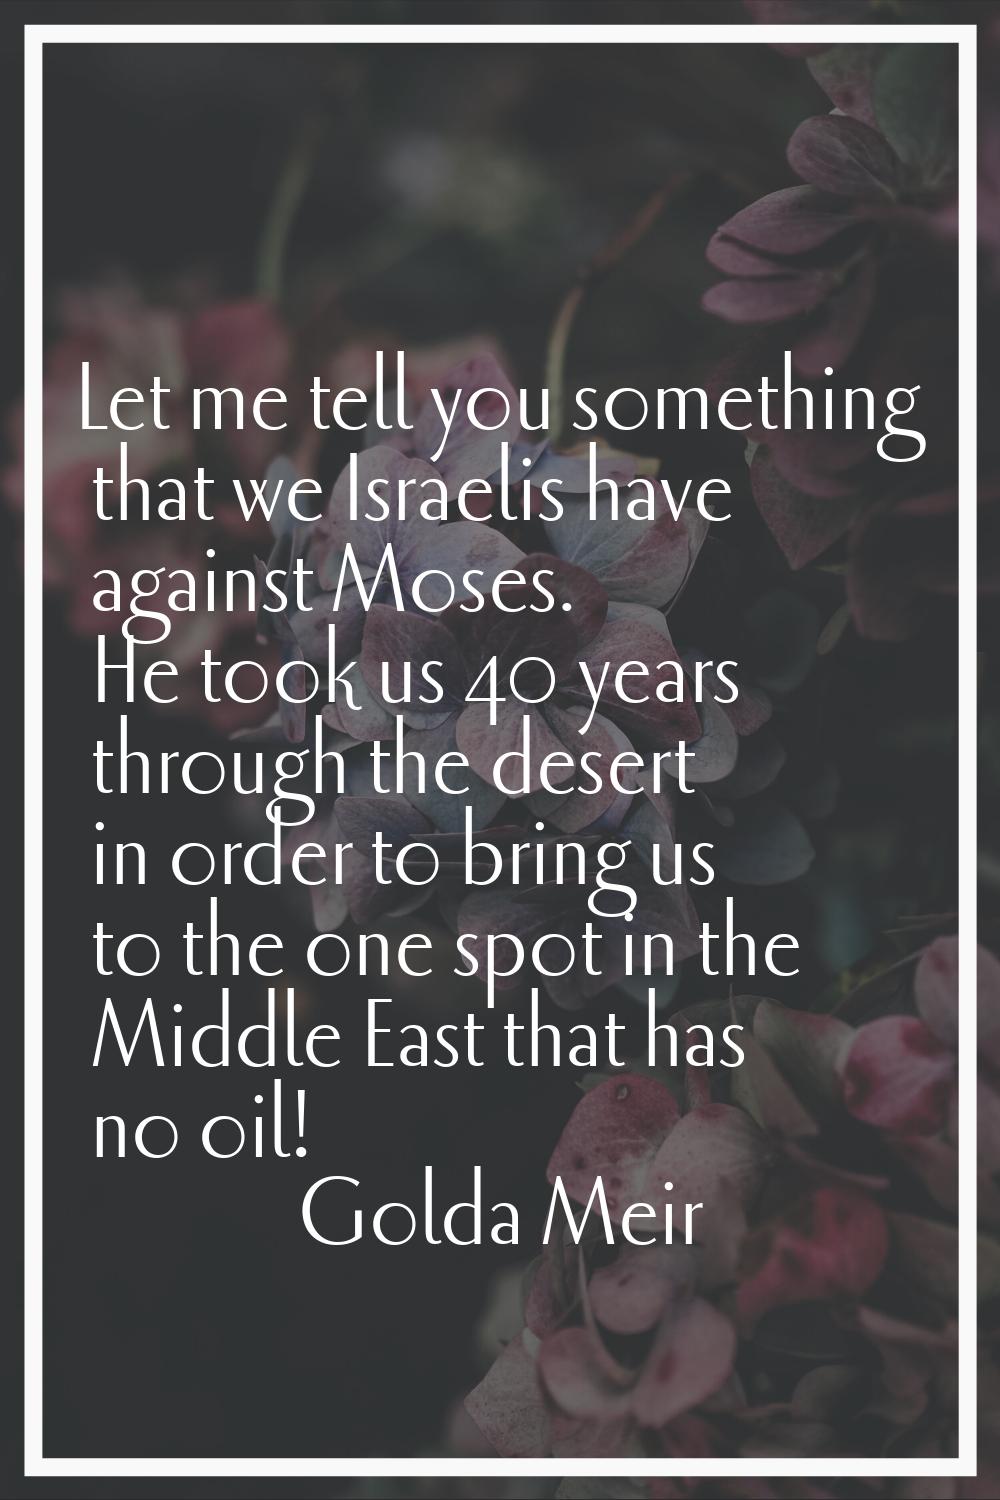 Let me tell you something that we Israelis have against Moses. He took us 40 years through the dese